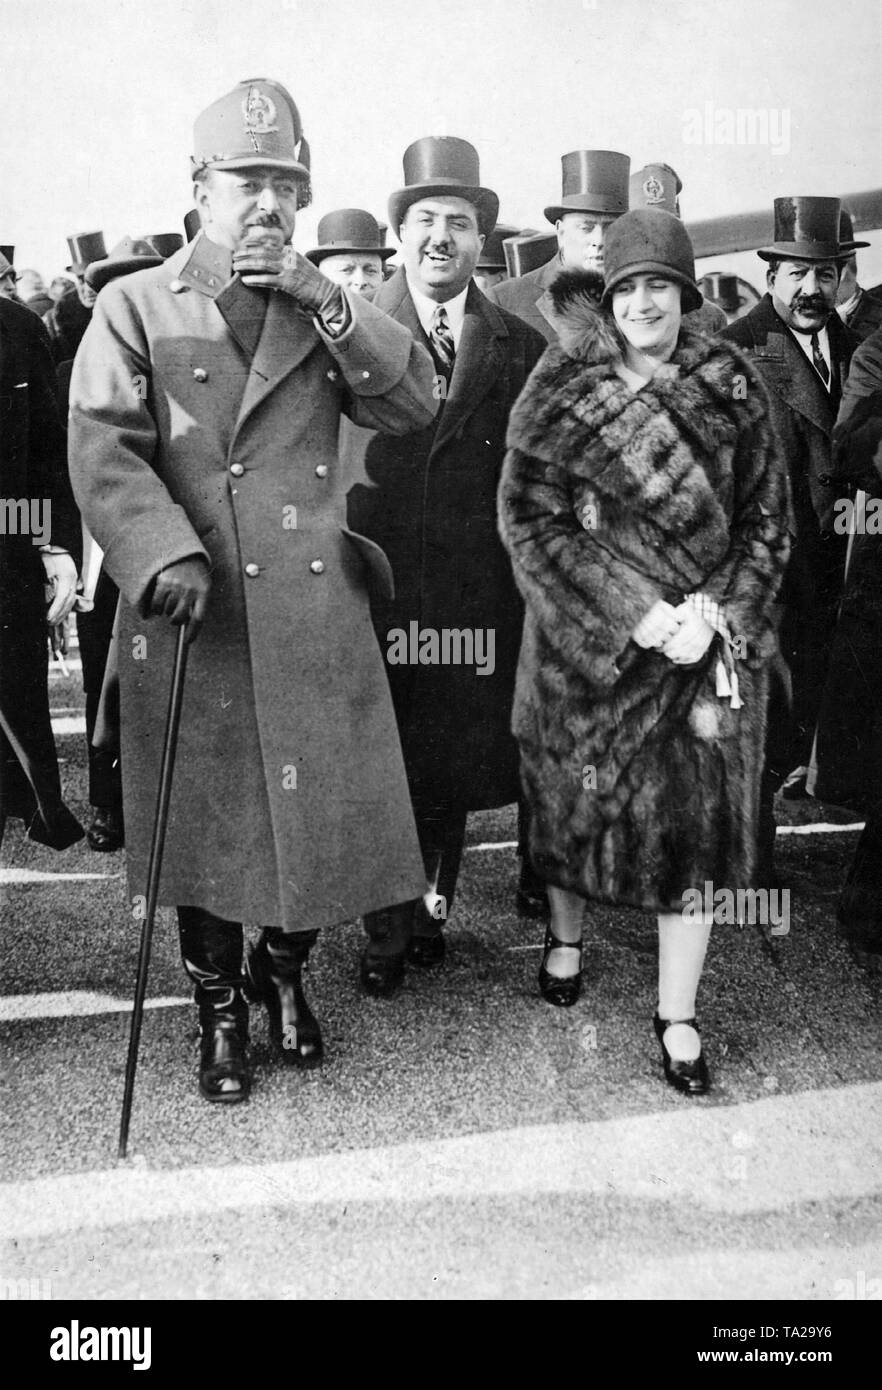 Amanullah Khan (1892-1960), King of Afghanistan and his wife, Queen Soraya. Stock Photo